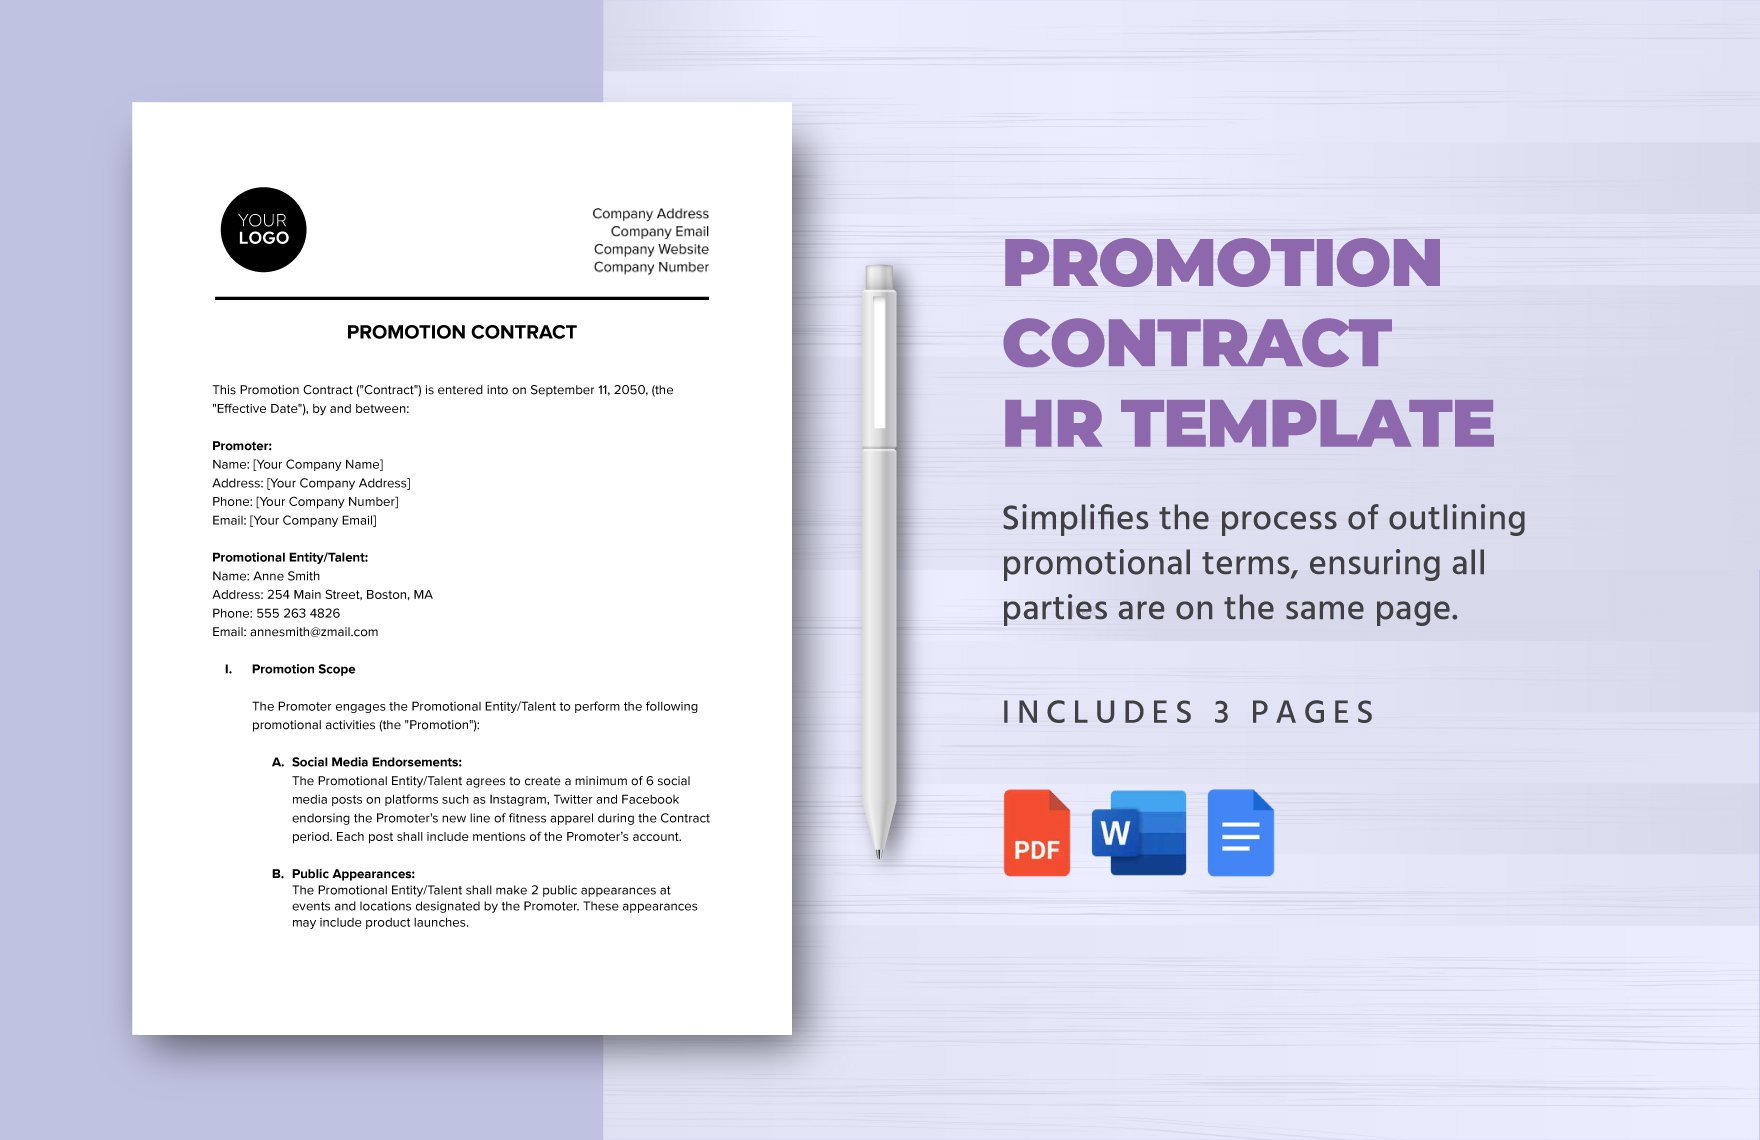 Promotion Contract HR Template in Word, Google Docs, PDF